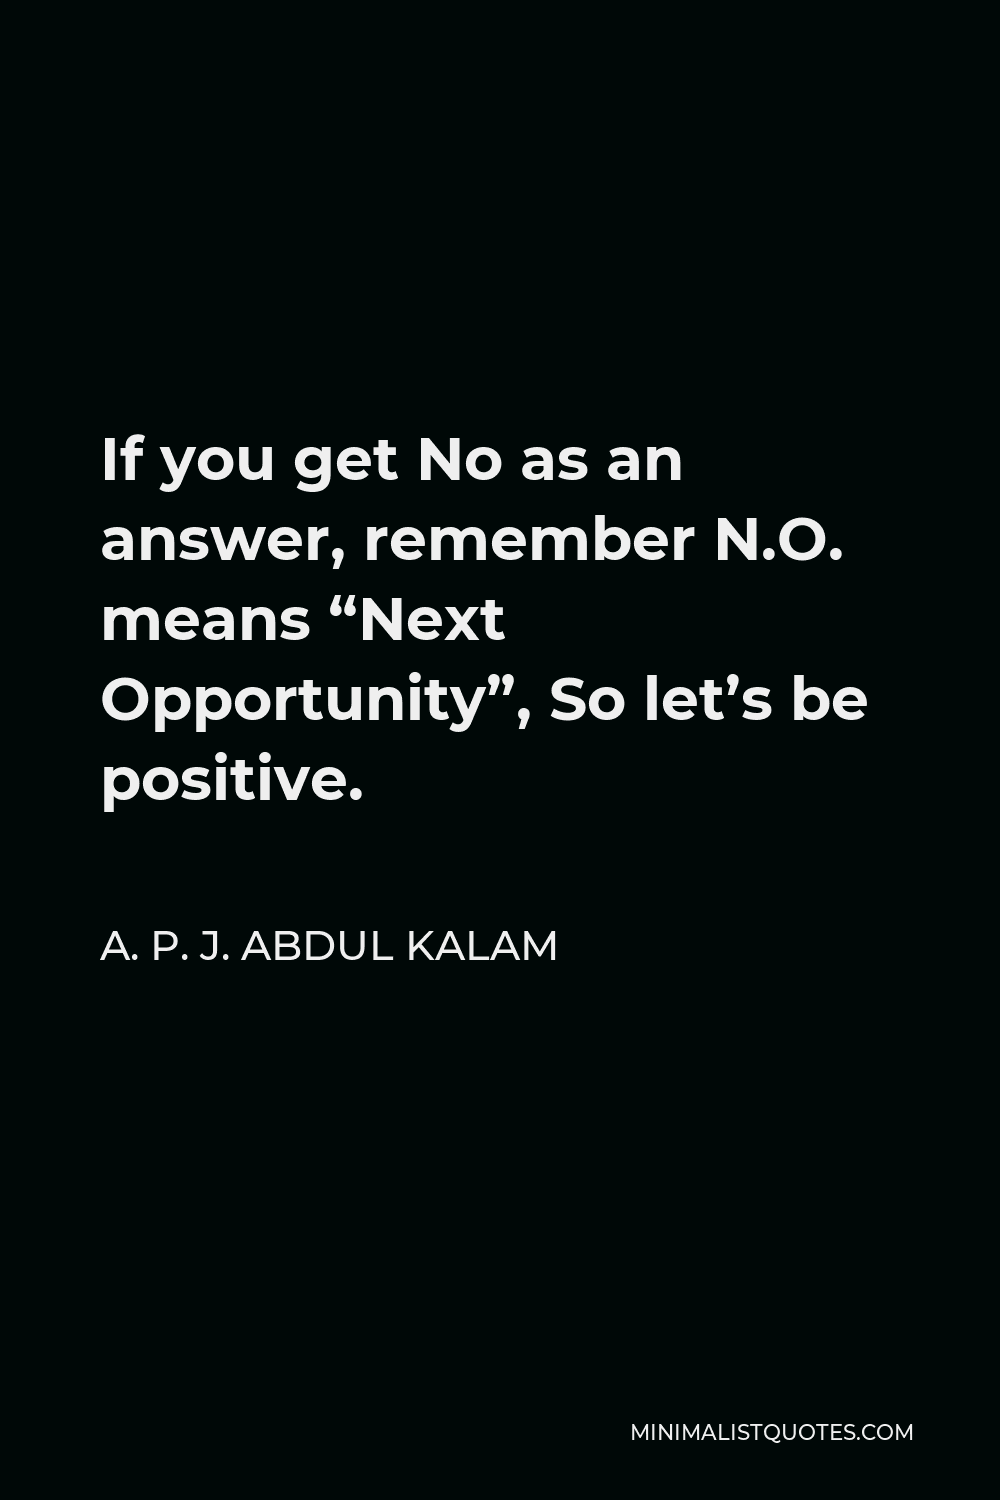 A. P. J. Abdul Kalam Quote - If you get No as an answer, remember N.O. means “Next Opportunity”, So let’s be positive.